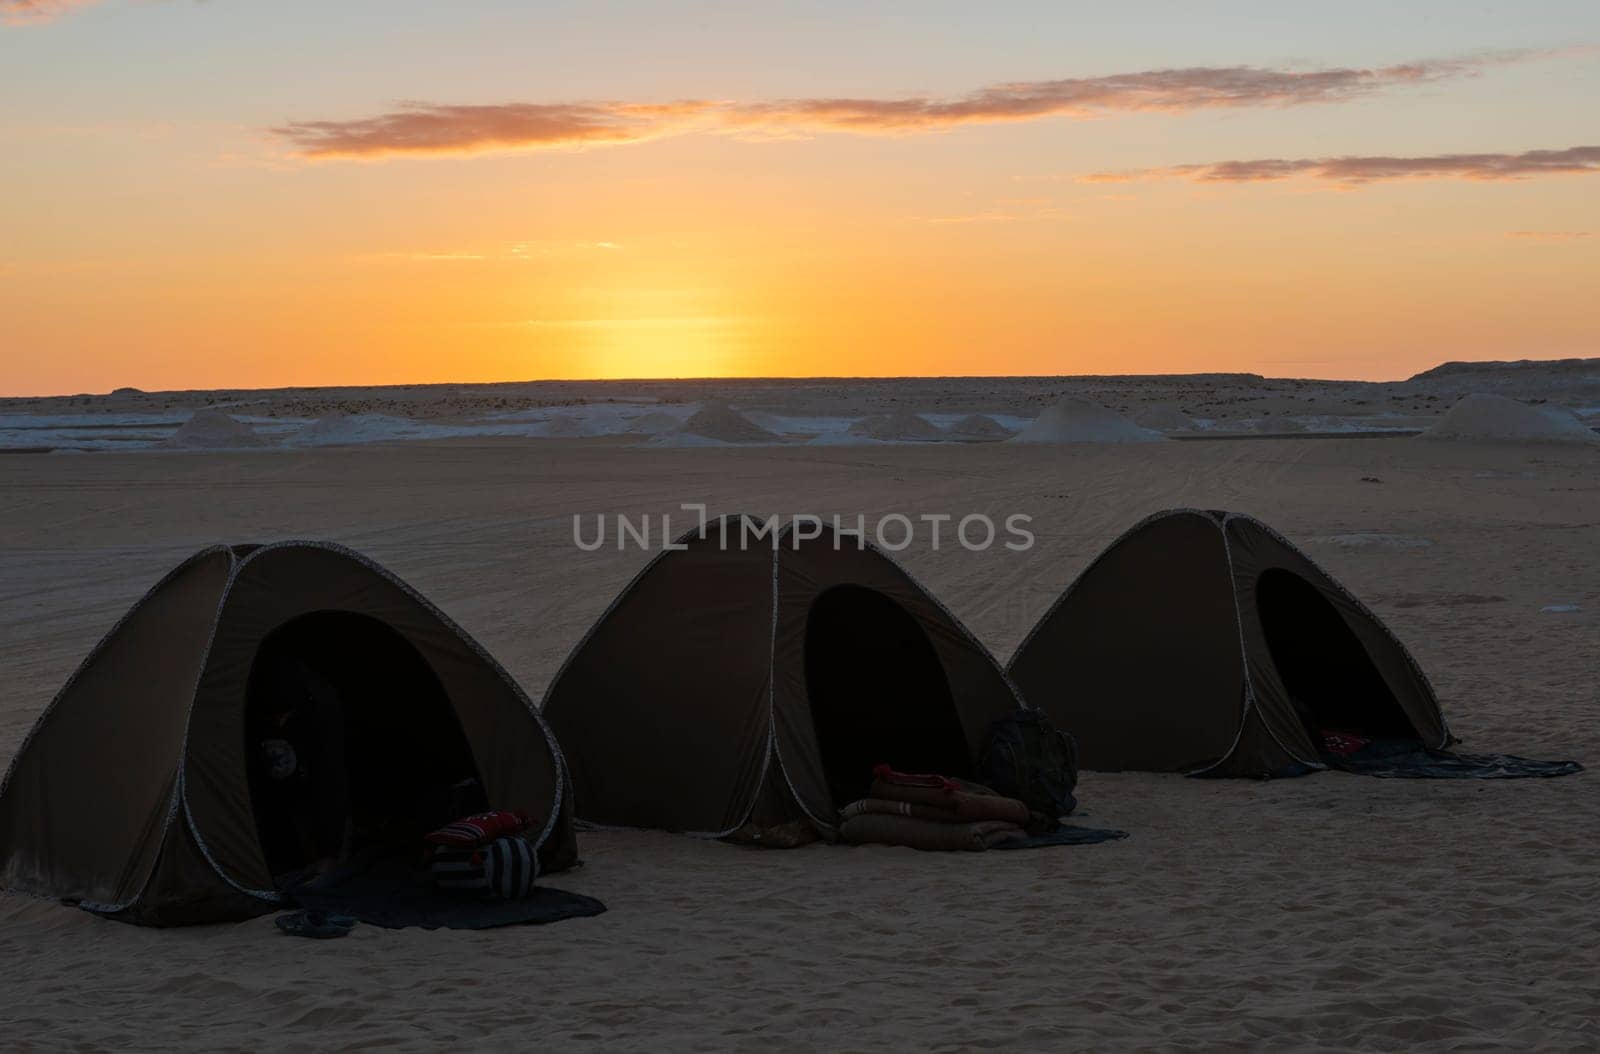 Landscape scenic view of desolate barren western desert campsite in Egypt with tents camping against sunrise background